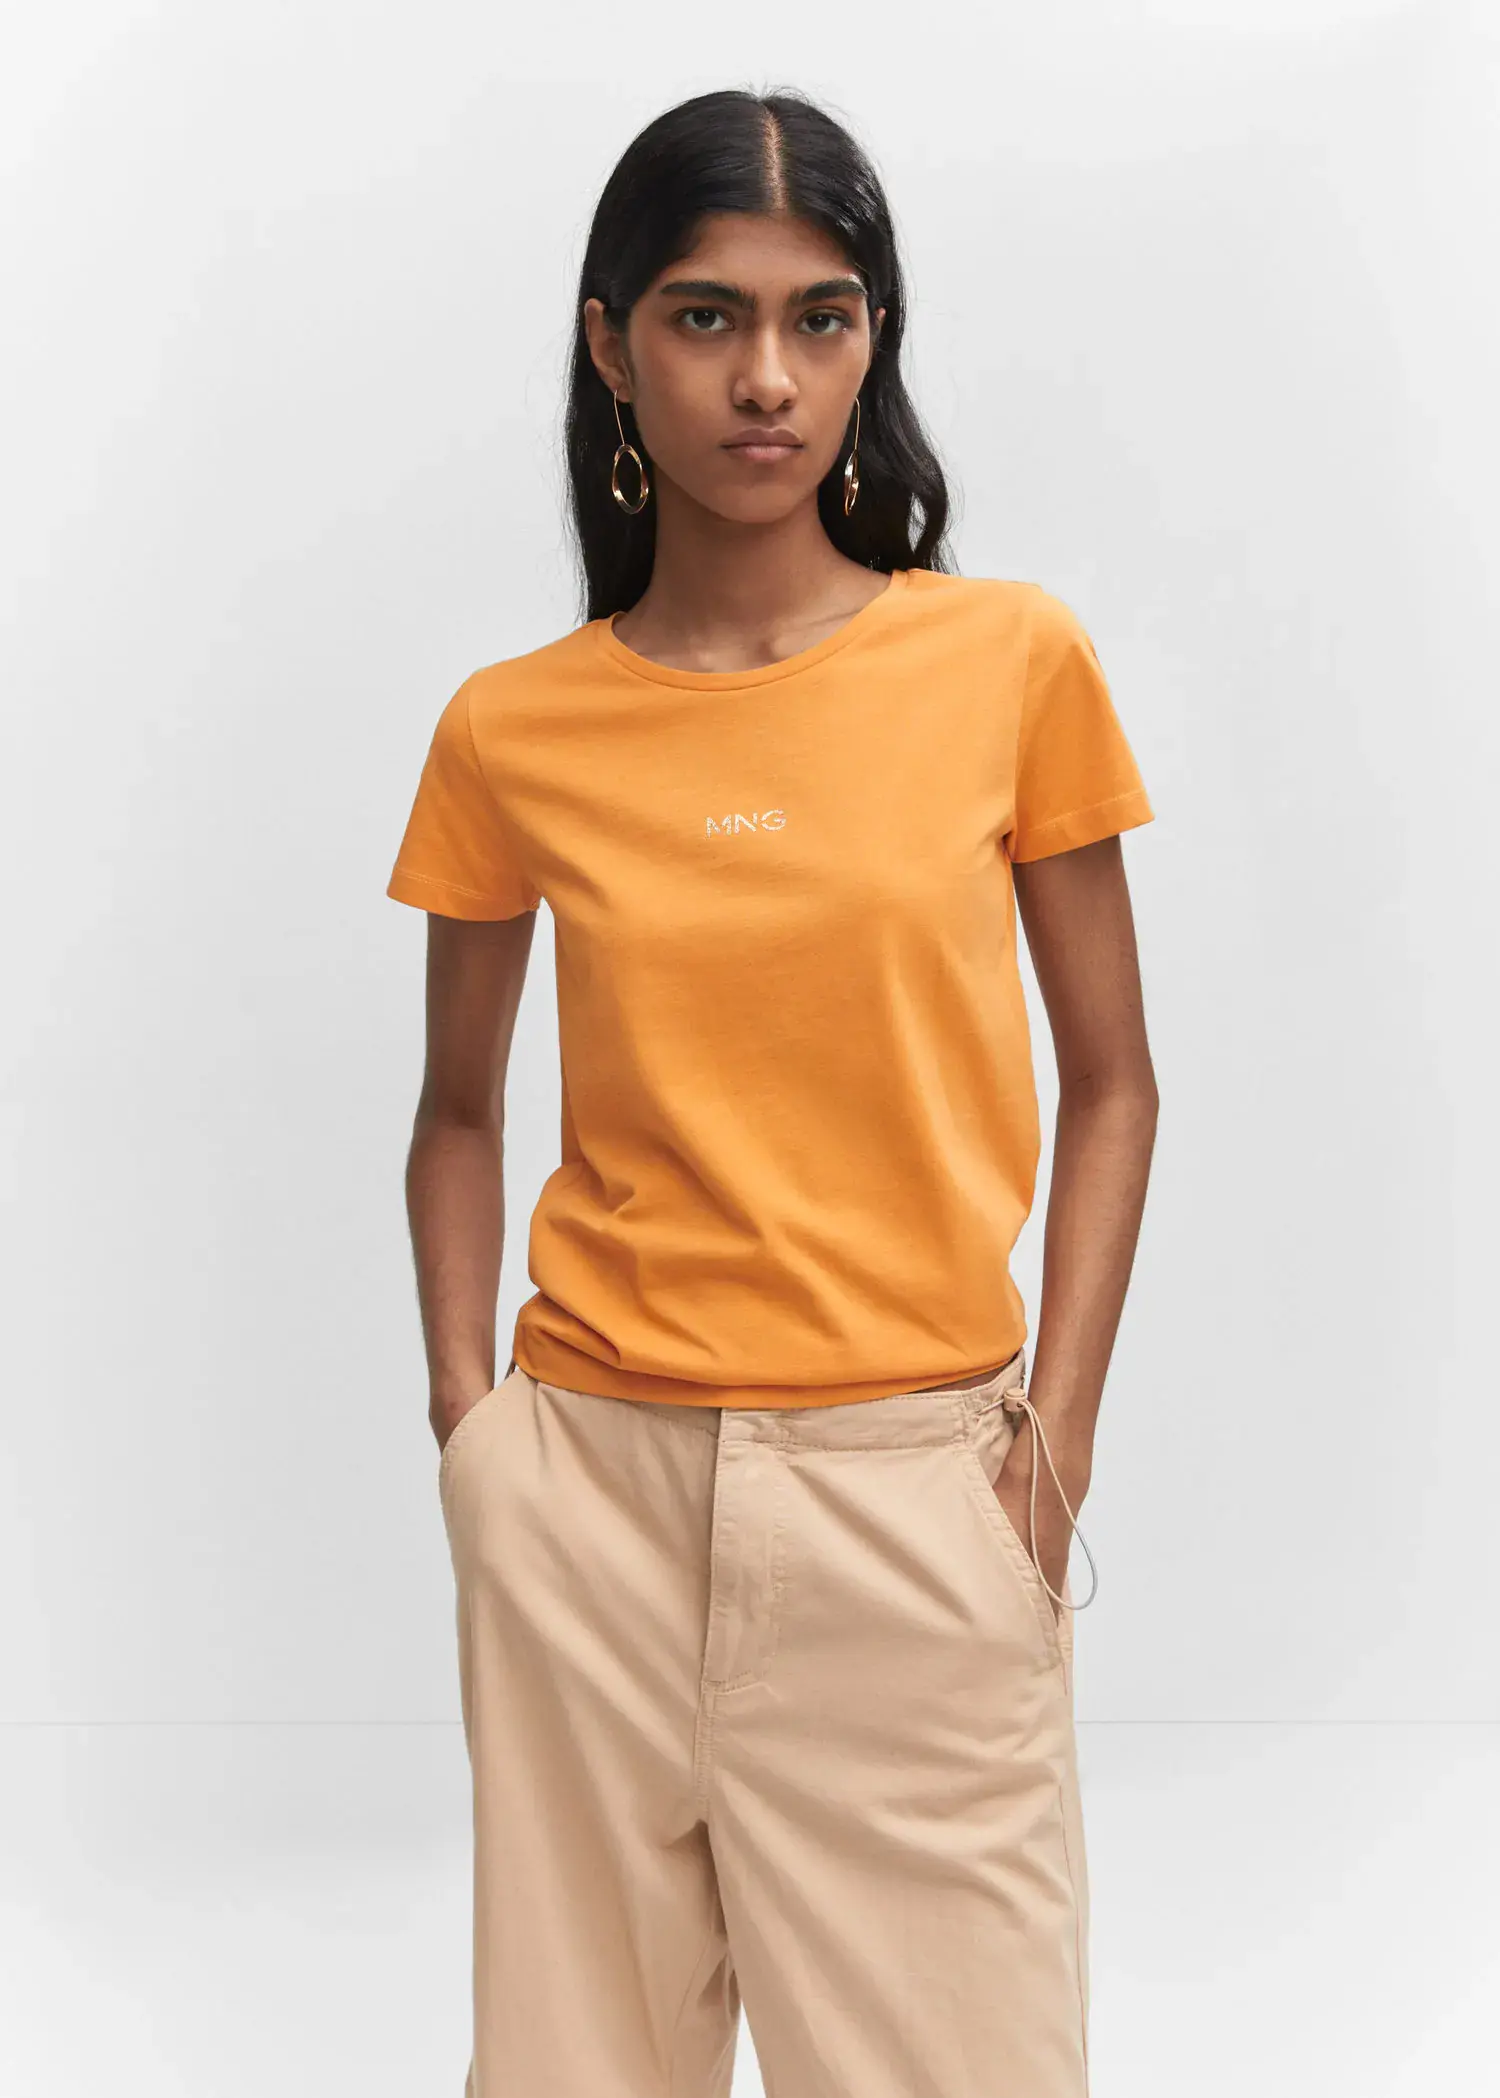 Mango Metallic logo T-shirt. a woman in a yellow t-shirt is standing with her hands in her pockets 